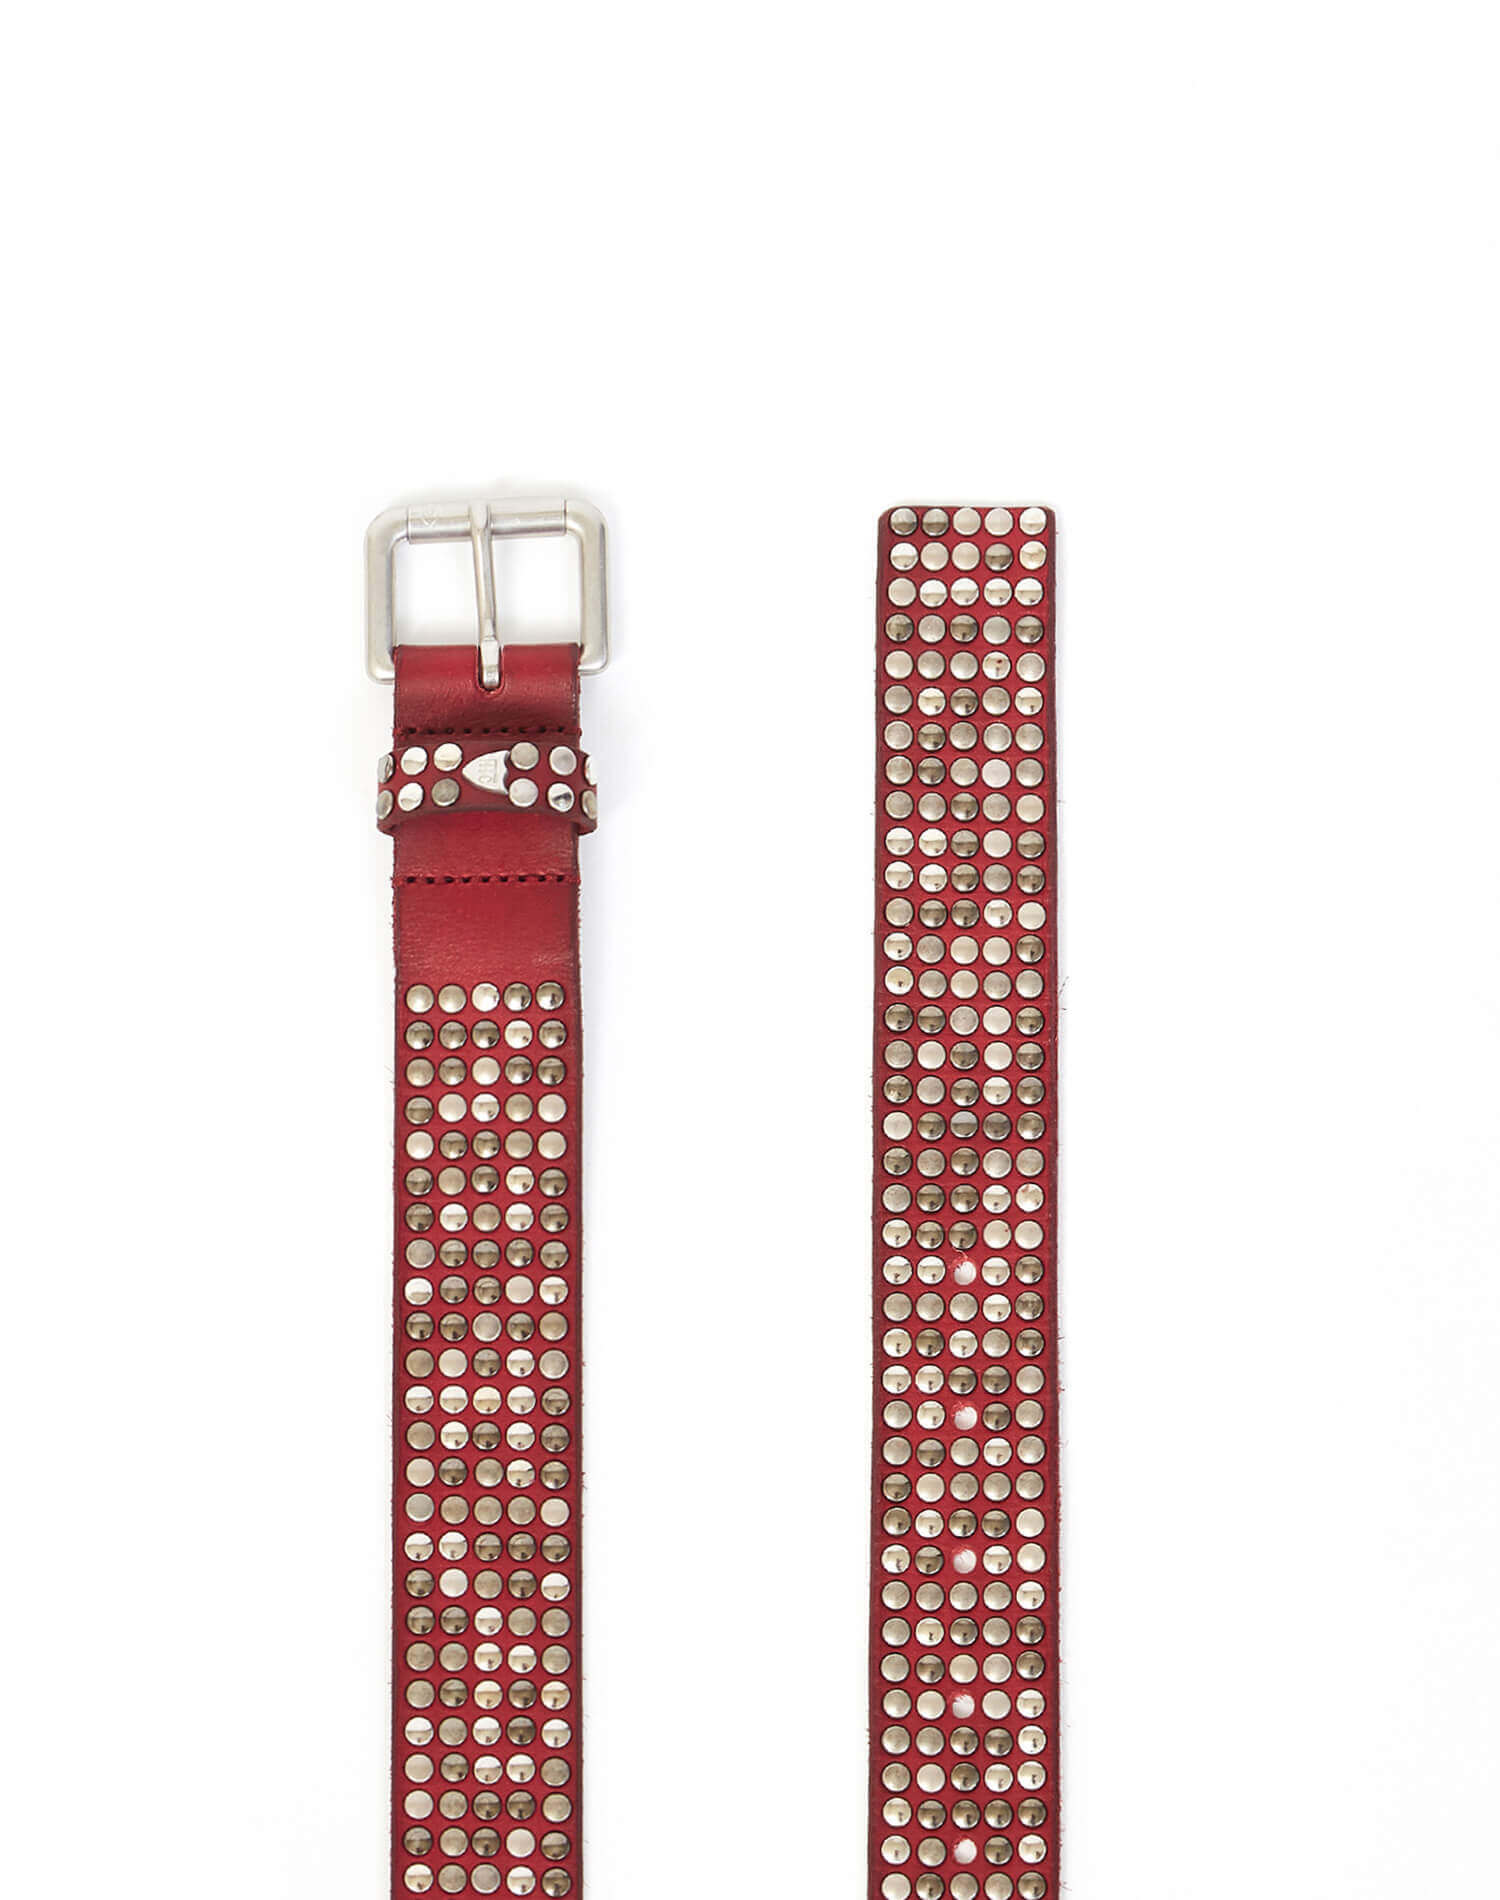 5.000 STUDS BELT Red leather belt with mixed studs, brass buckle, studded zamac belt loop with HTC logo rivet. Height: 3.5 cm. Made in Italy. HTC LOS ANGELES